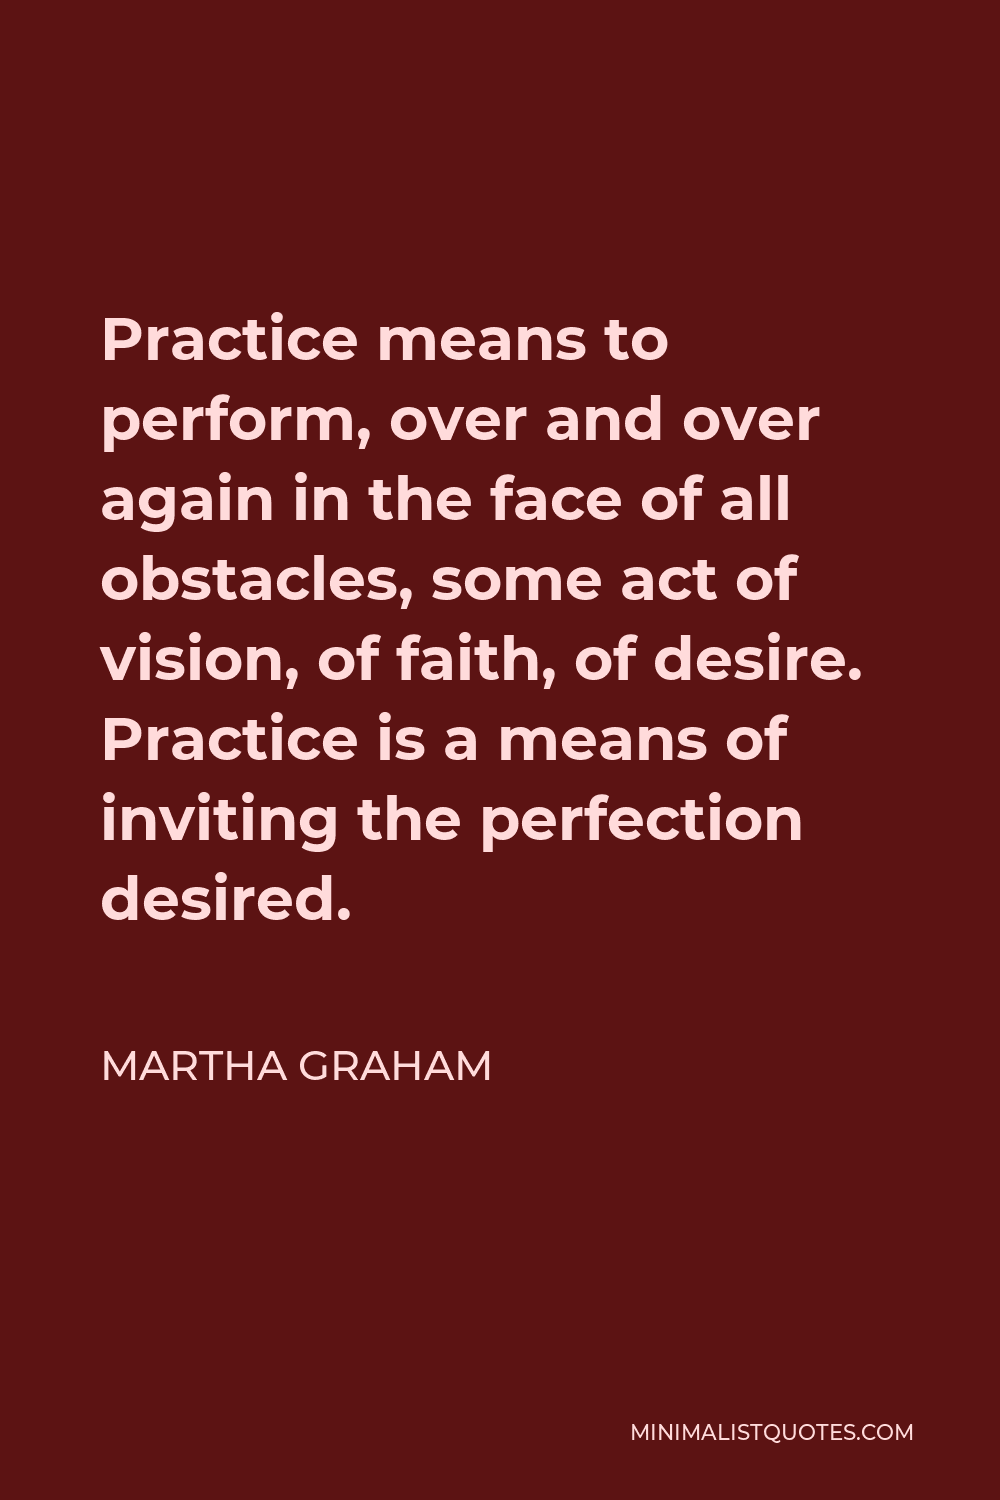 Martha Graham Quote - Practice means to perform, over and over again in the face of all obstacles, some act of vision, of faith, of desire. Practice is a means of inviting the perfection desired.